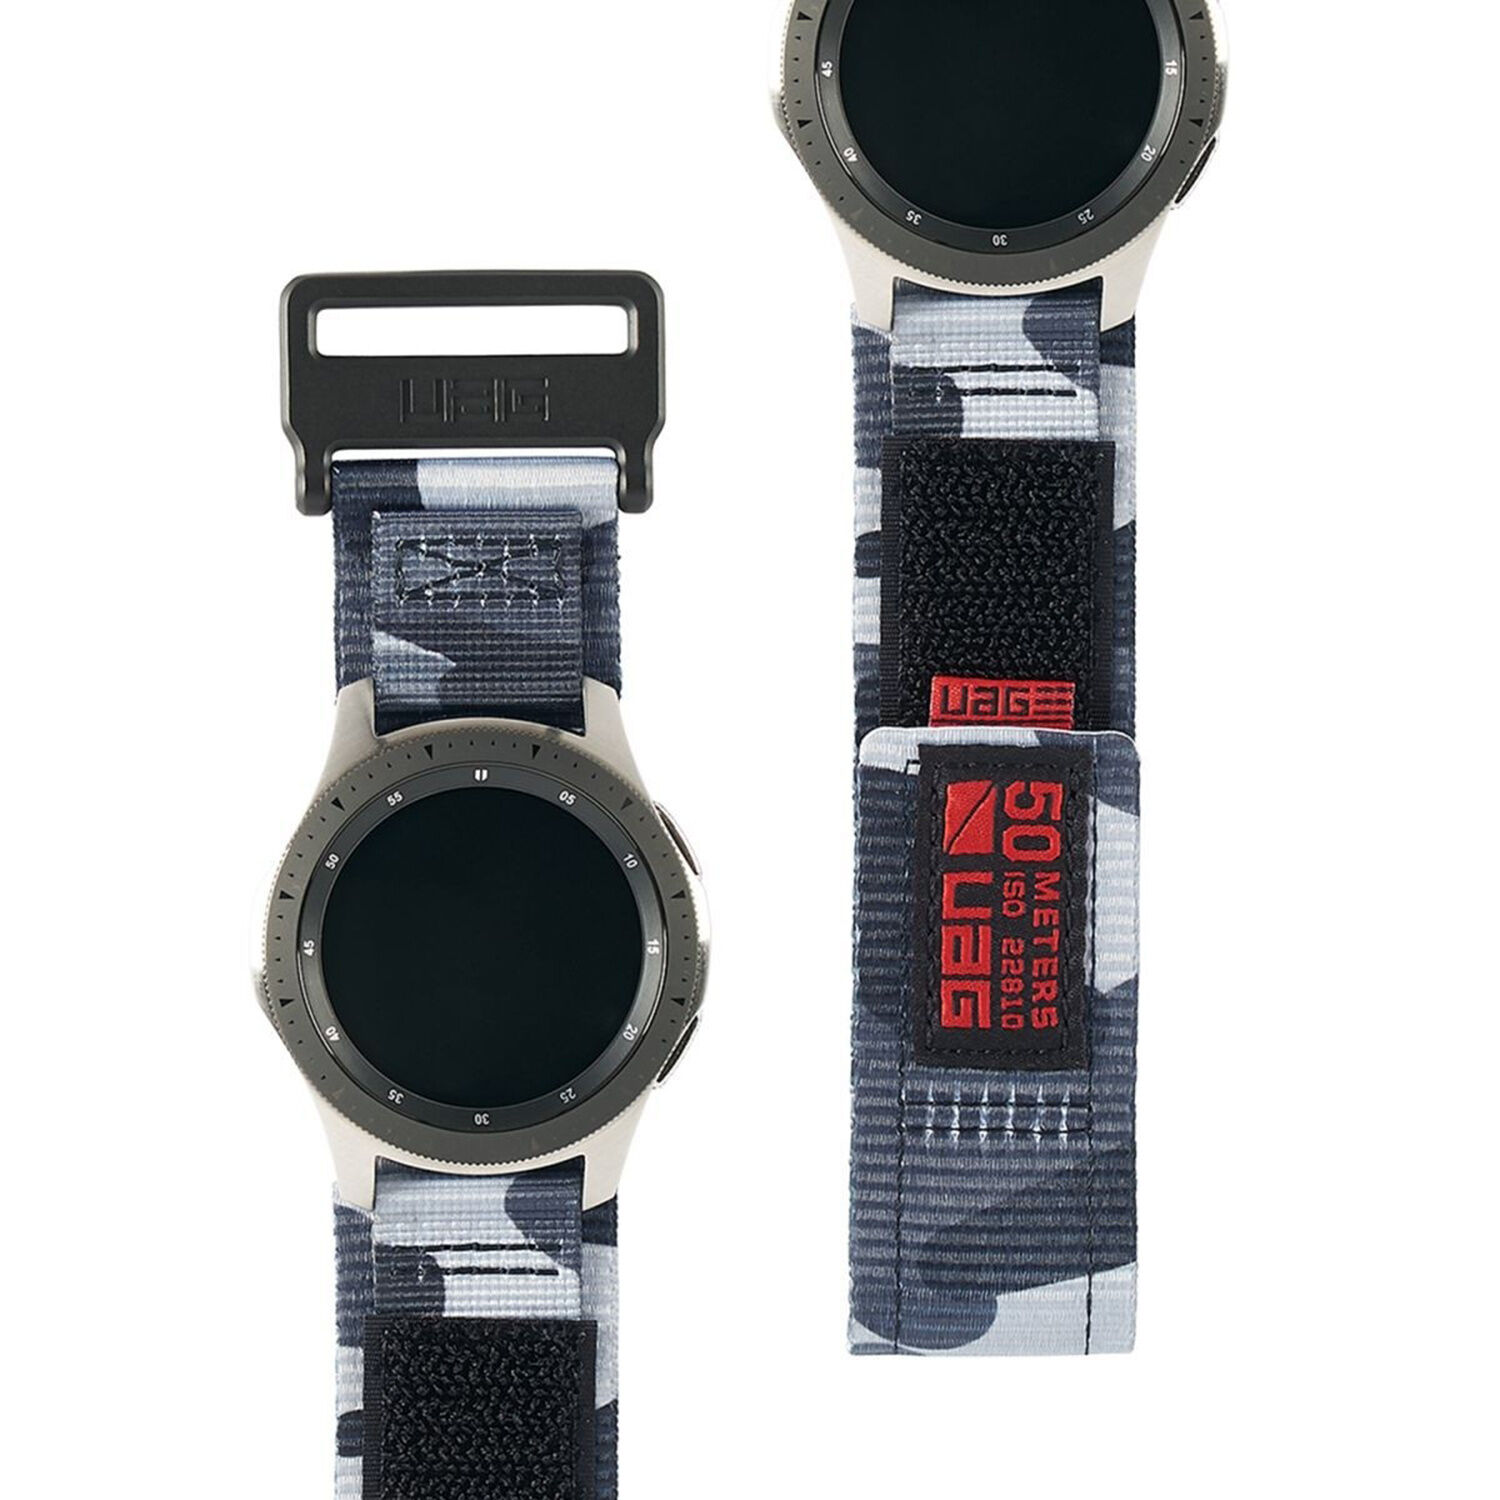 UAG Samsung Gear S3 Frontier: UAG Active Strap band